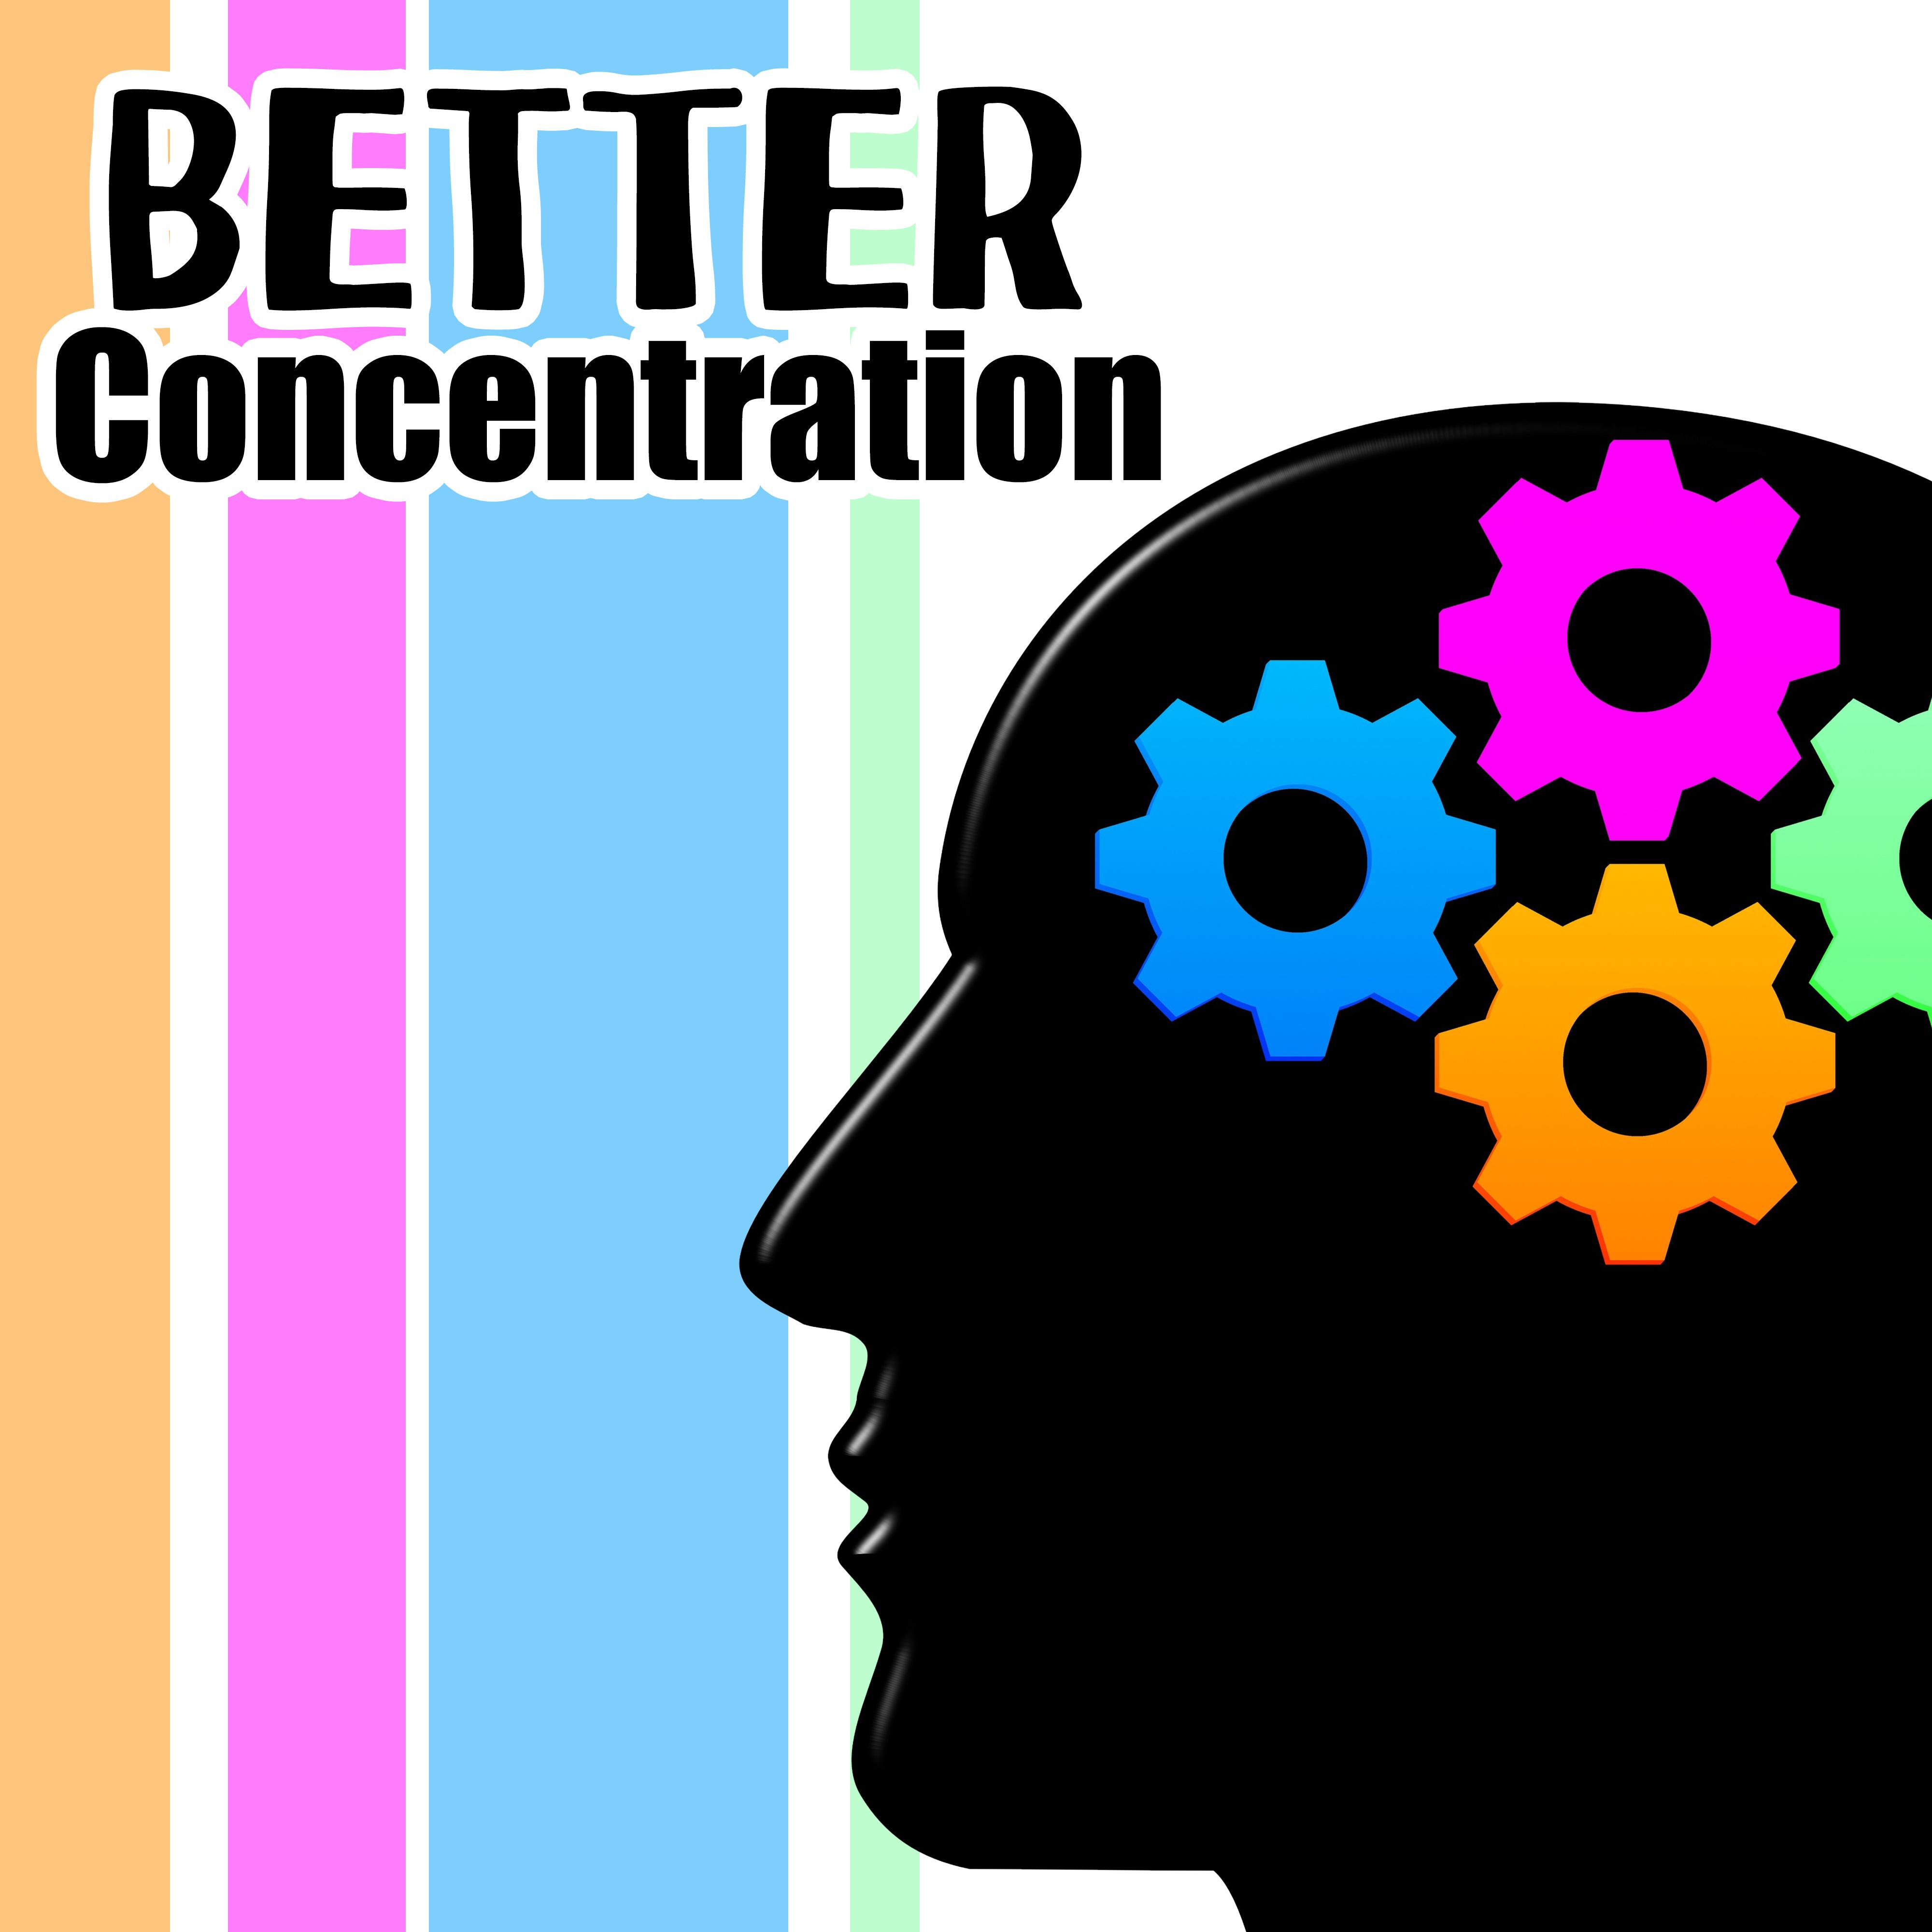 Better Concentration – Music for Study, Deep Focus, Nature Sounds, Healing Water, Stress Relief, Easy Exam